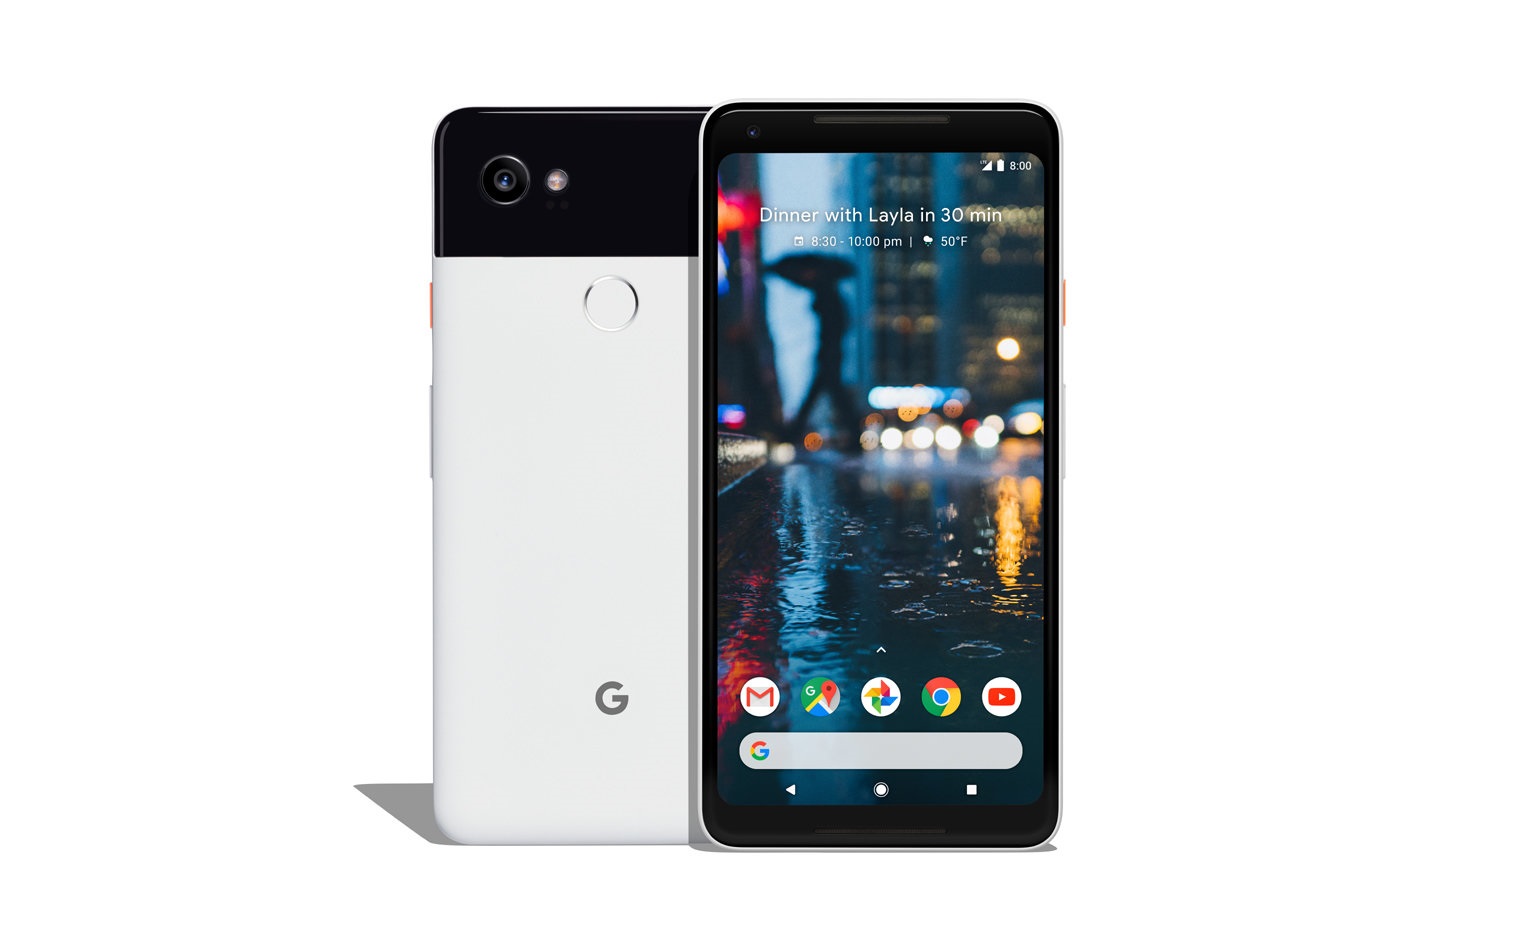 How To Fix Google Pixel 2 Not Charging [Troubleshooting Guide]